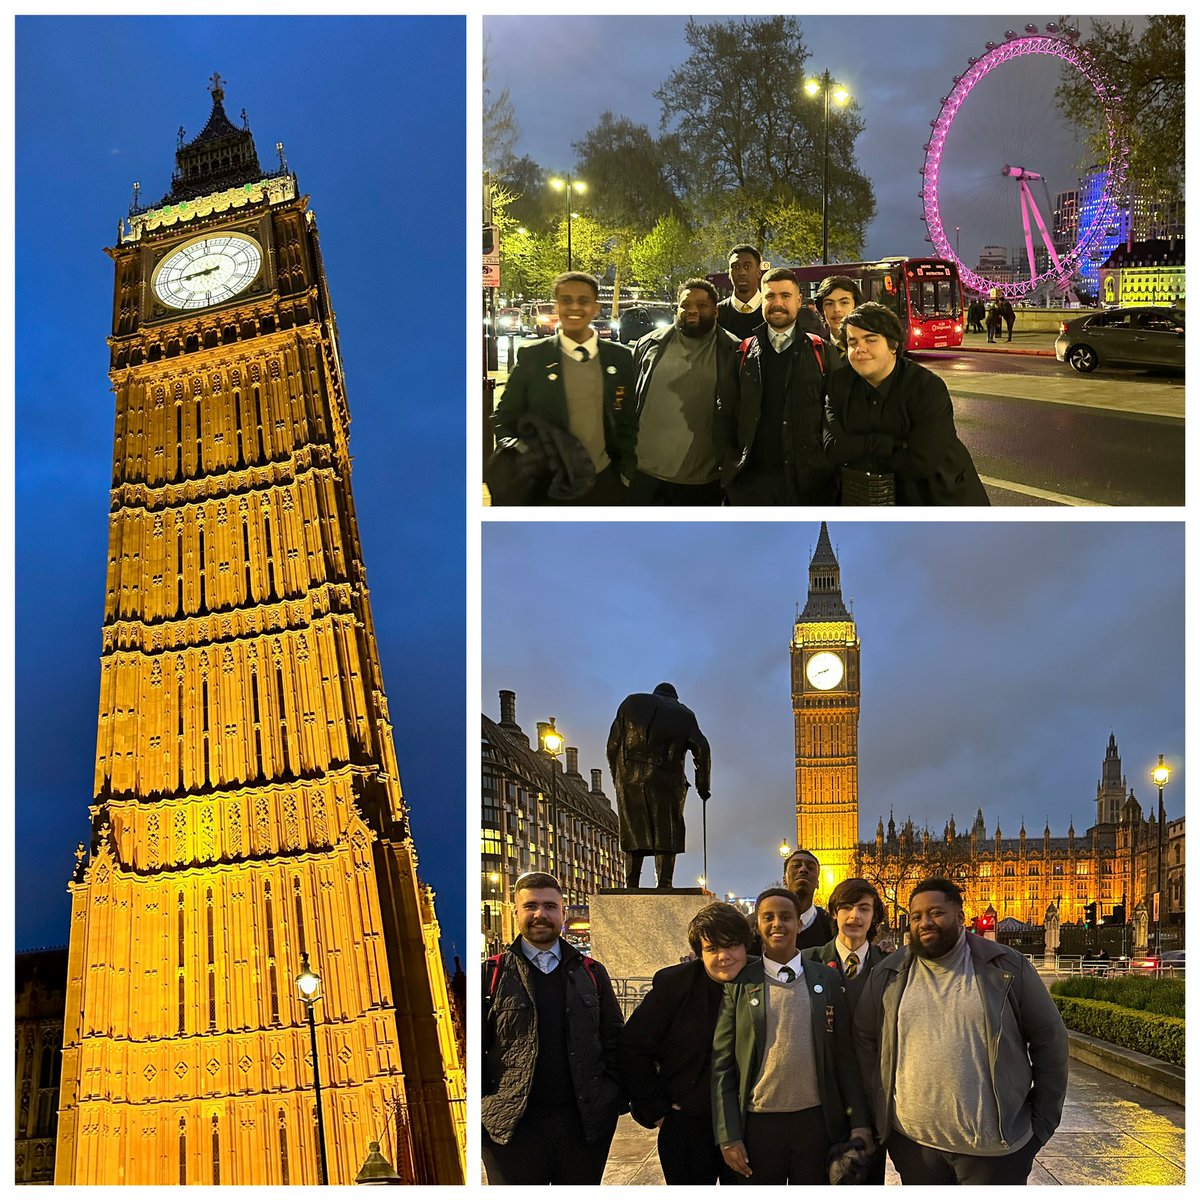 We joined hundreds of @citizens_london institutions @MCHW to ask the next Mayor of London to work with us on: work & wages, migration & refugee welcome to housing & climate justice. We heard @SadiqKhan agree our asks. We got to see iconic #london landmarks too! #culturalcapital